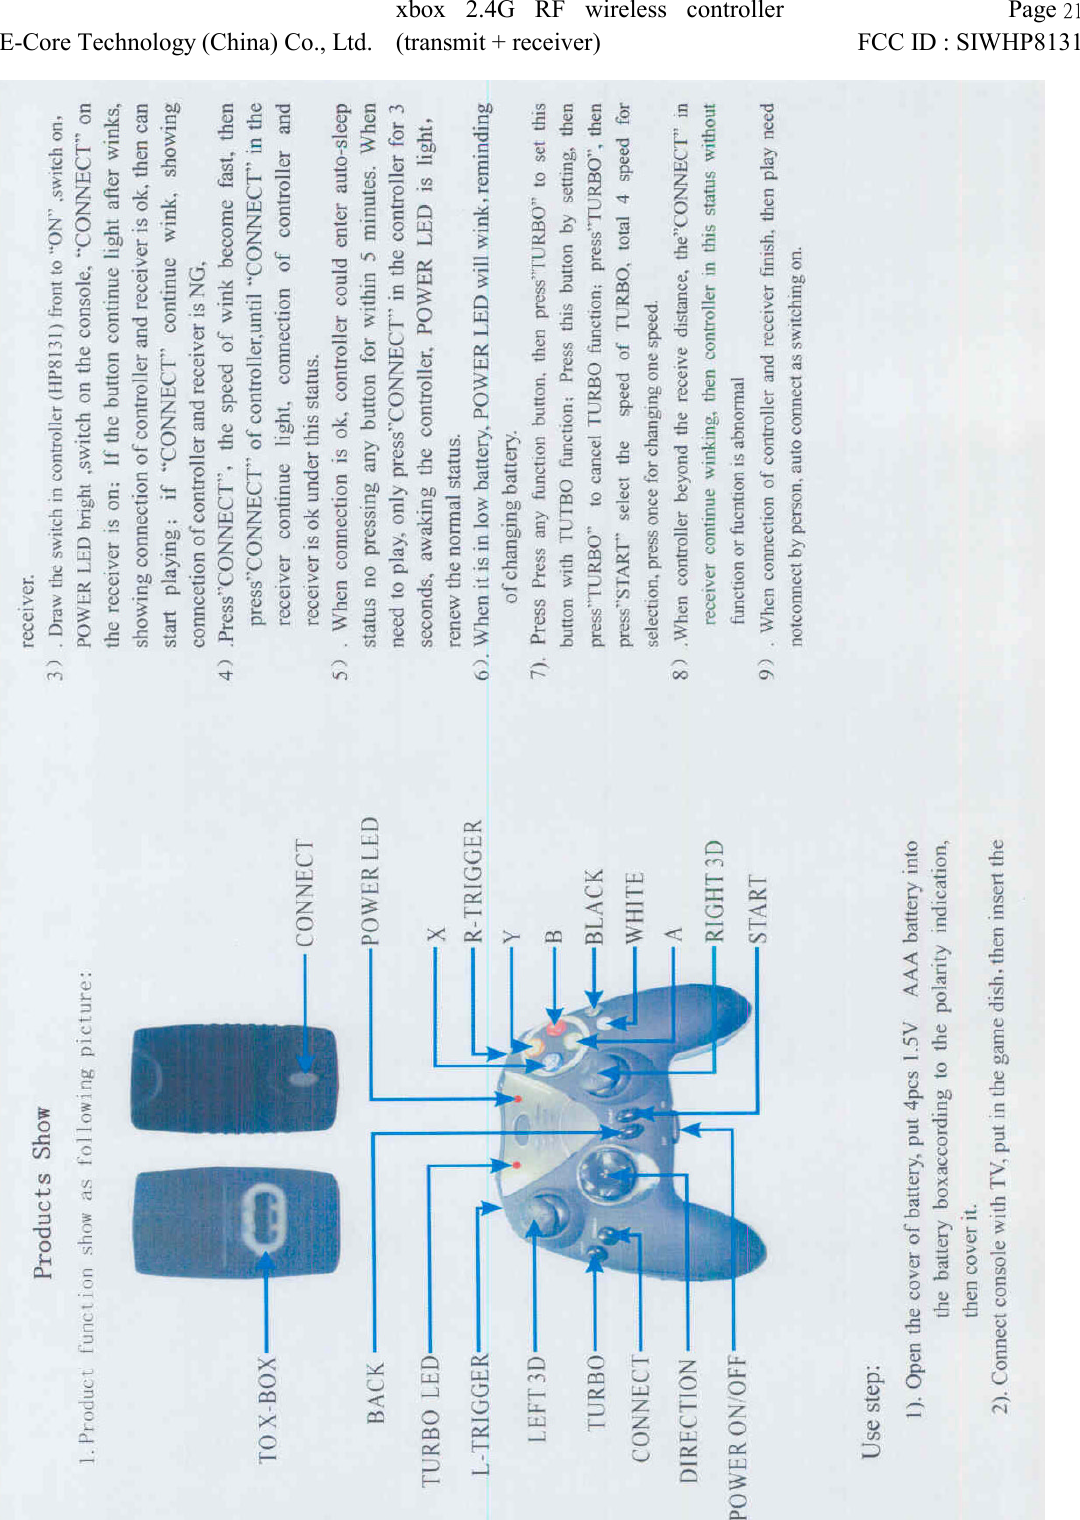  Page 21 E-Core Technology (China) Co., Ltd. xbox 2.4G RF wireless controller (transmit + receiver) FCC ID : SIWHP8131    